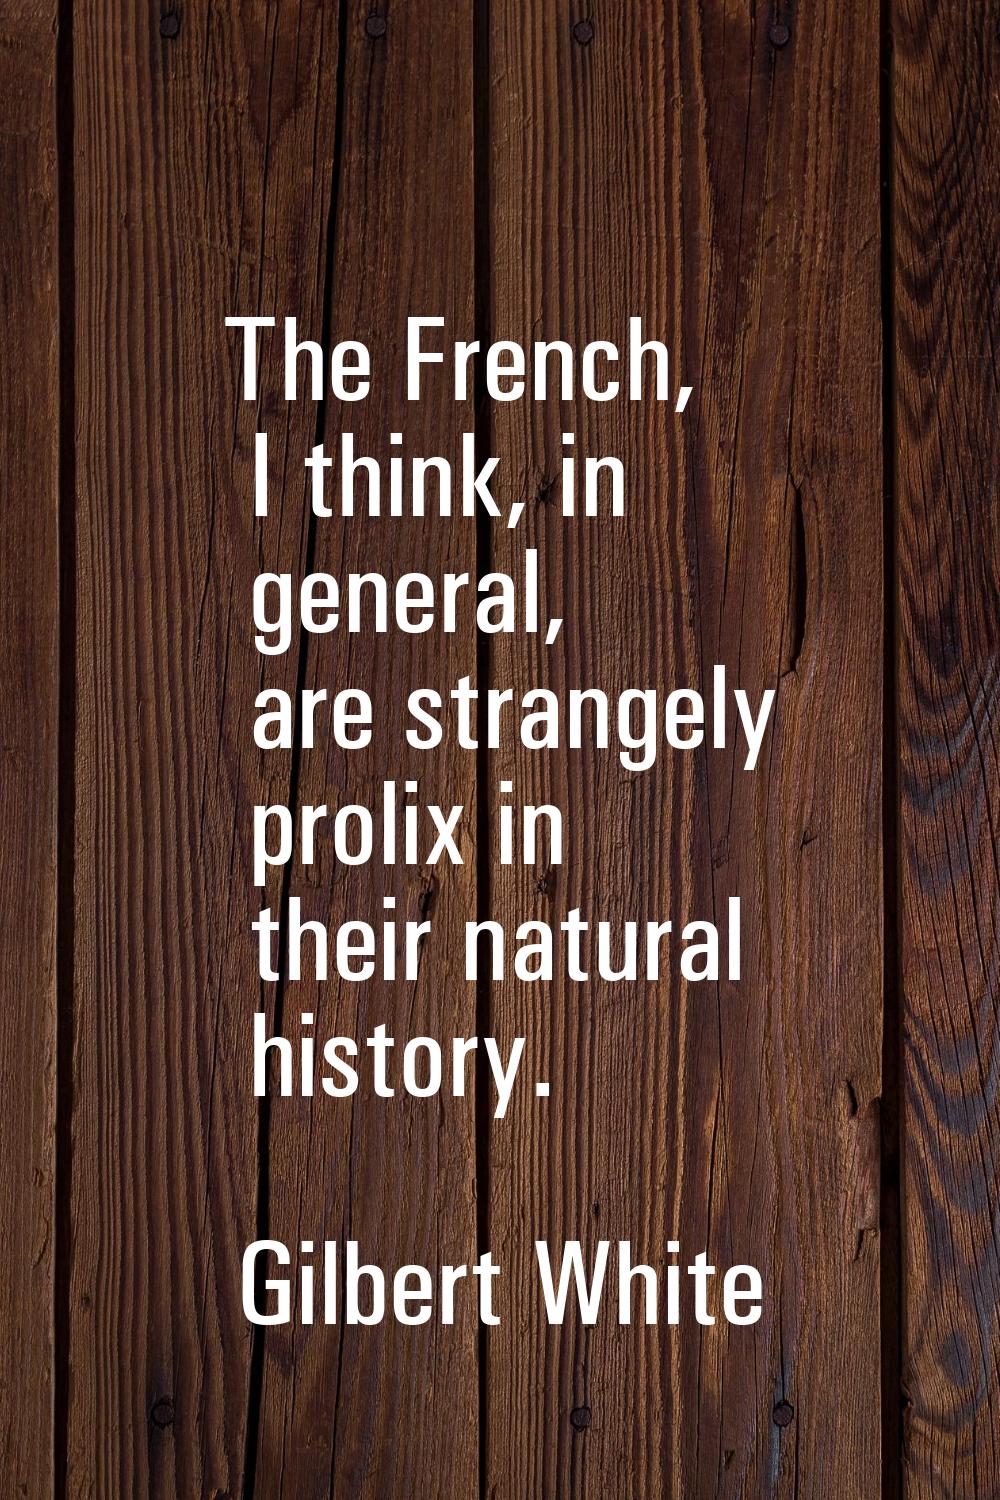 The French, I think, in general, are strangely prolix in their natural history.